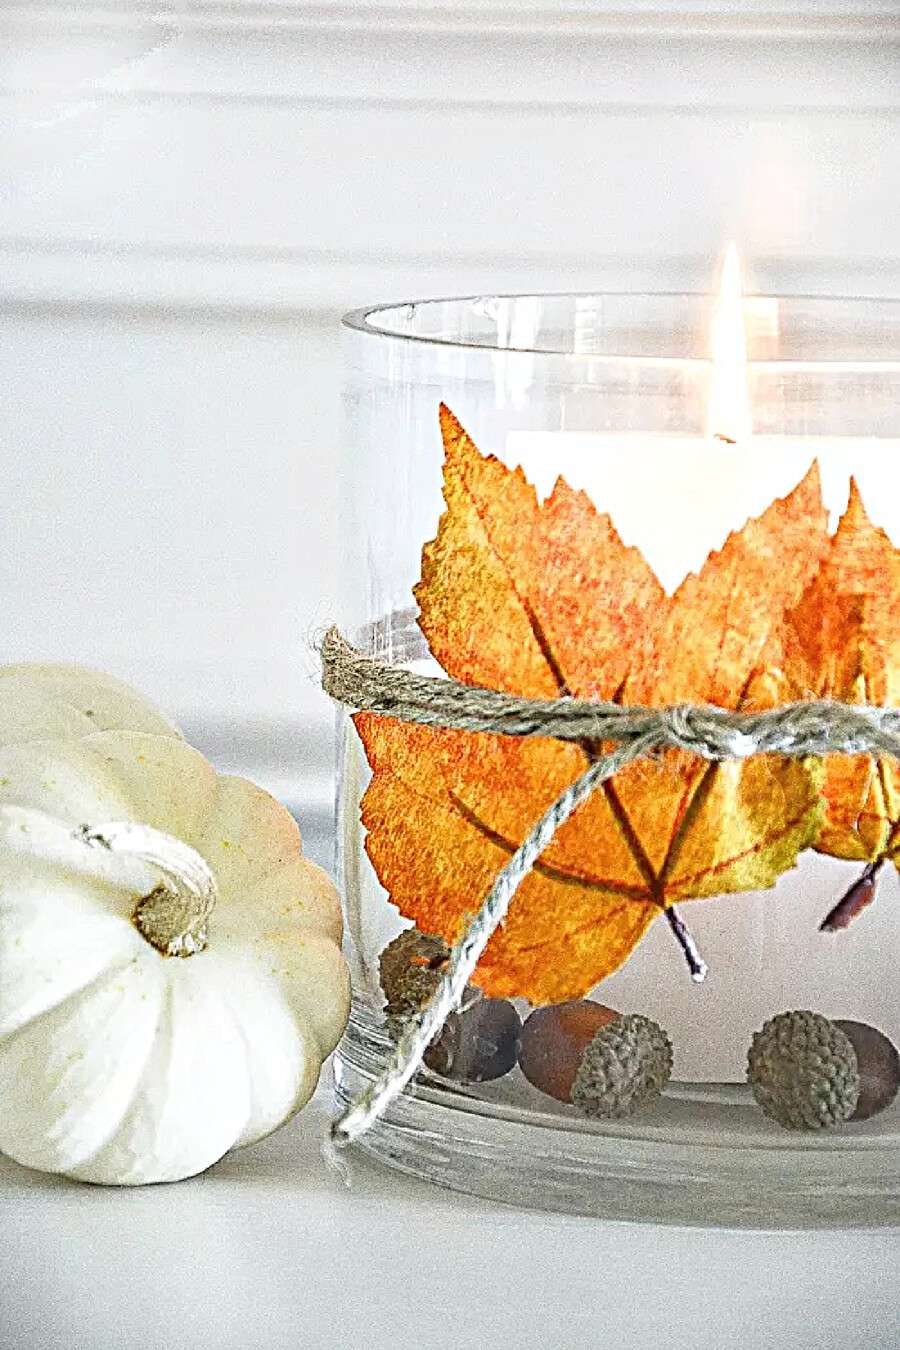 EASY 10 MINUTE FALL CANDLEHOLDER